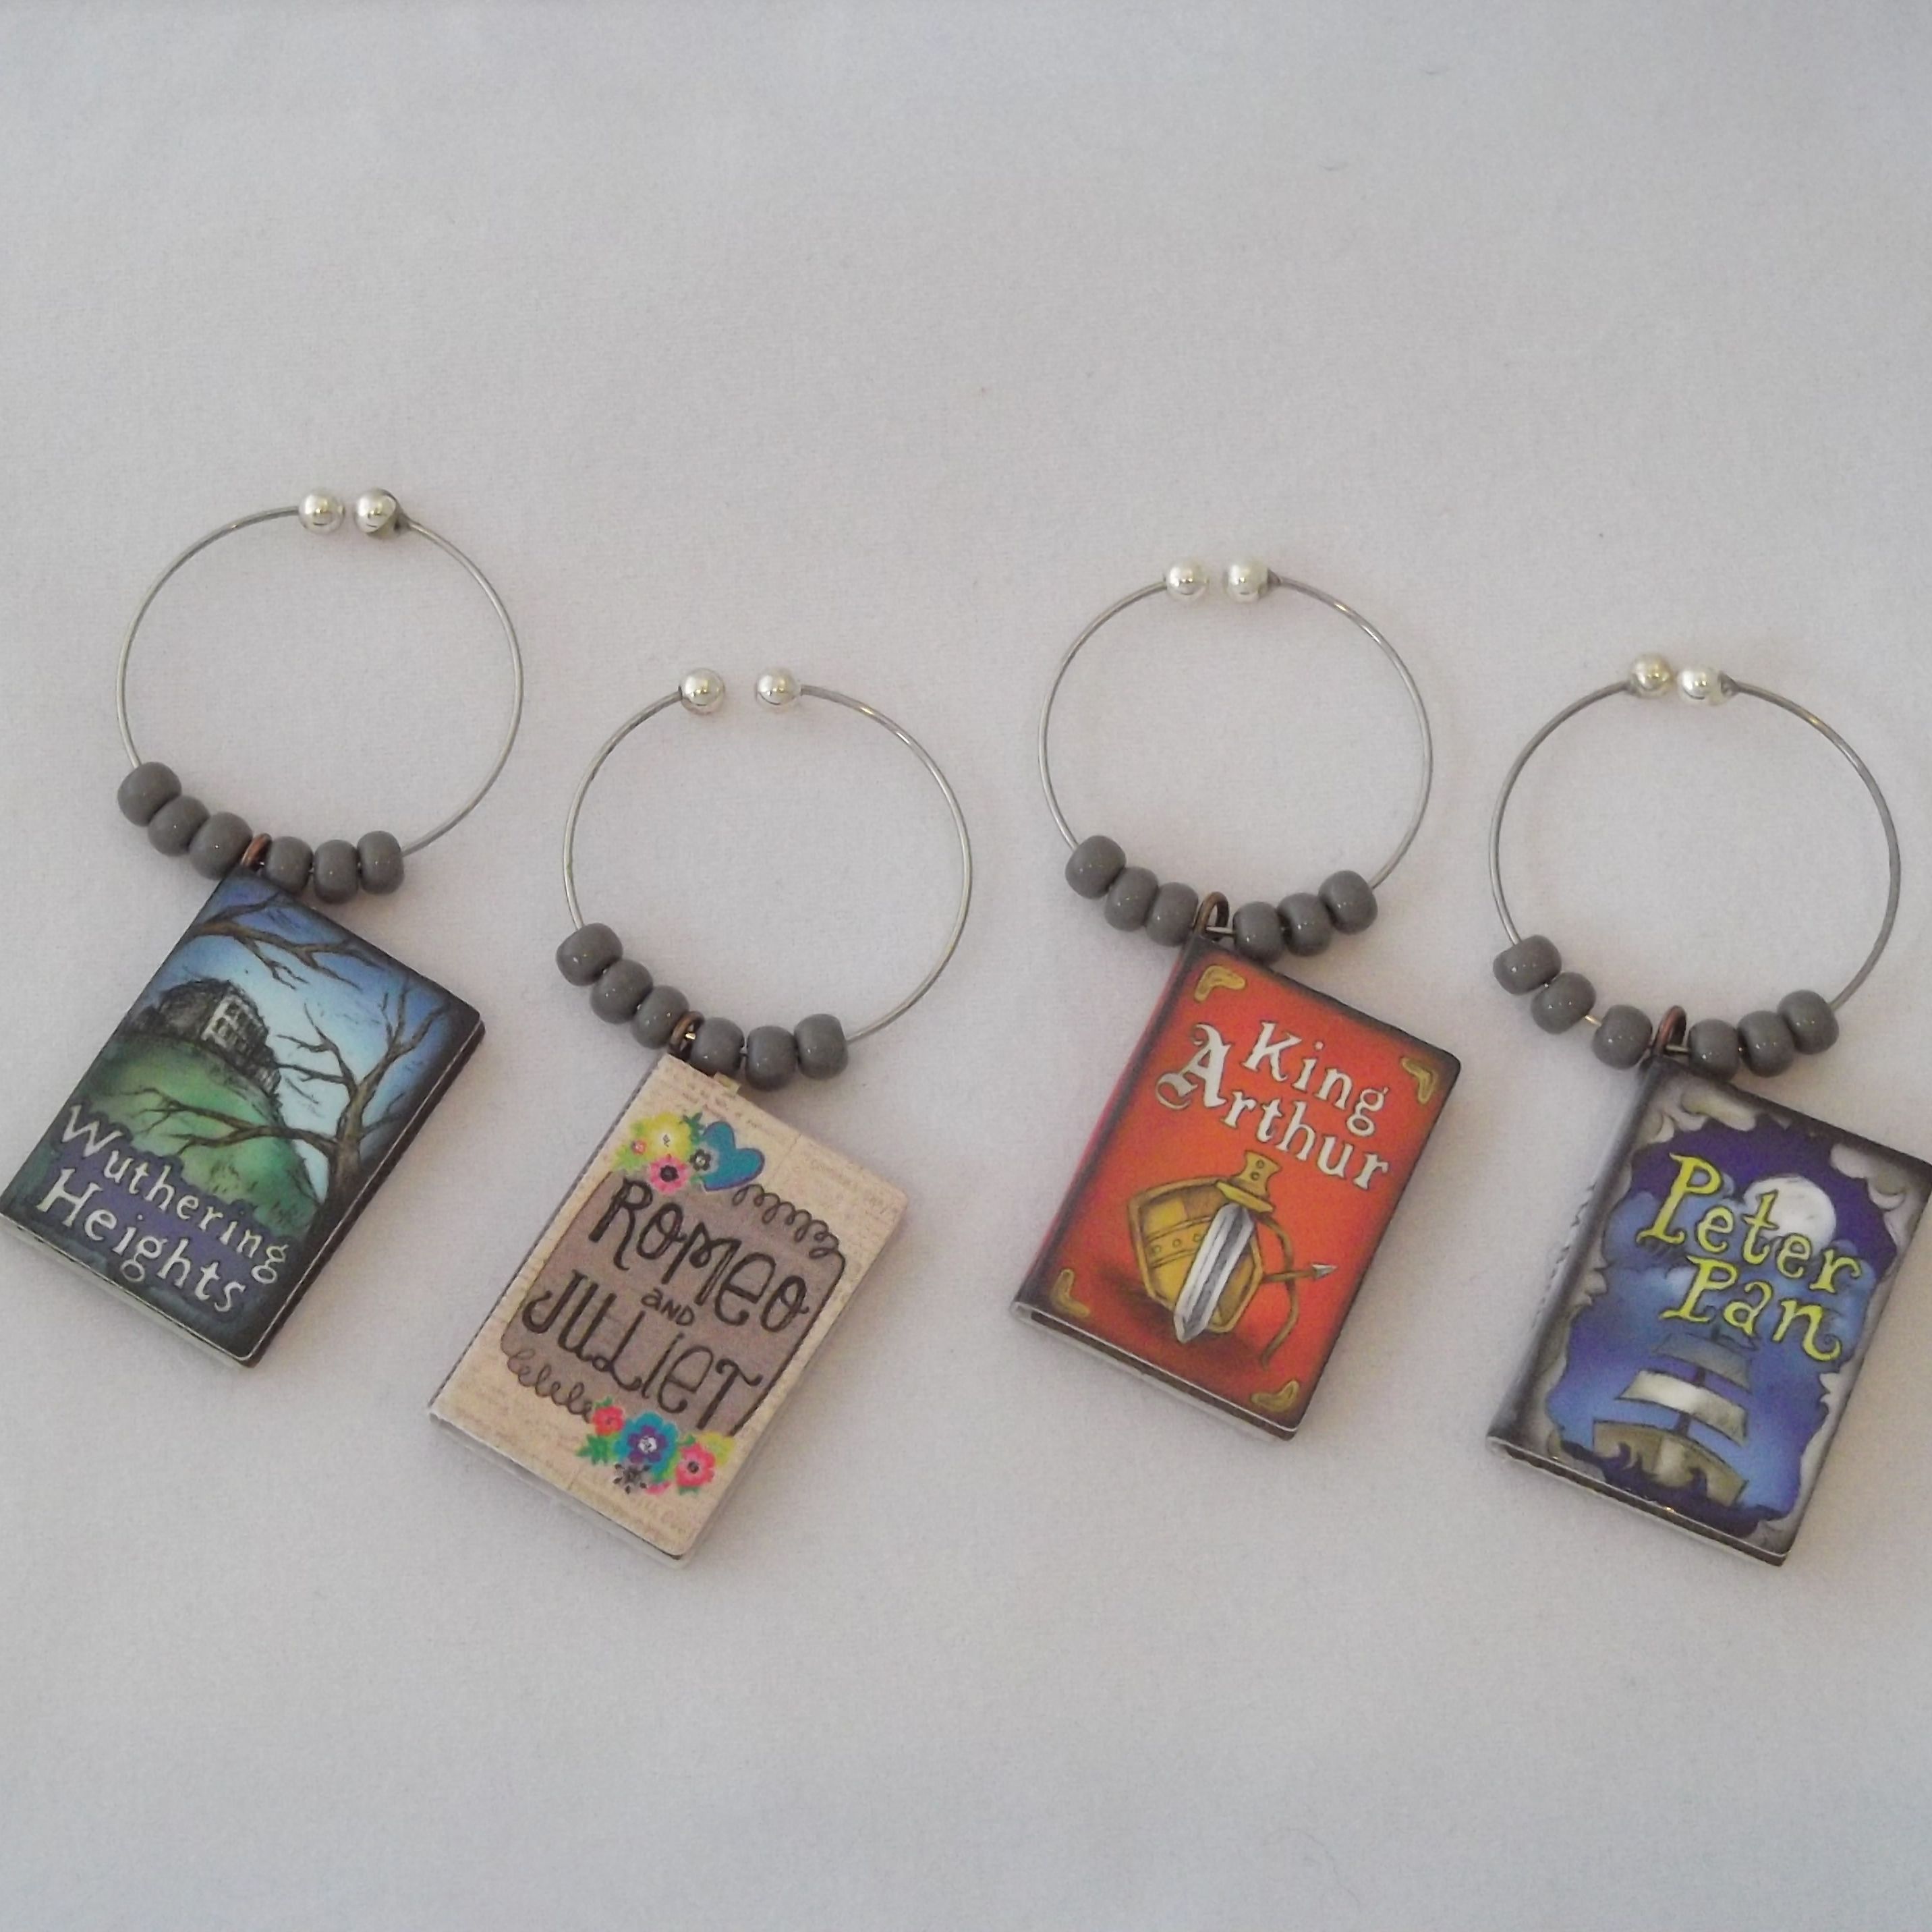 6 handmade Dickens miniature book wine glass charms perfect gift for a book club